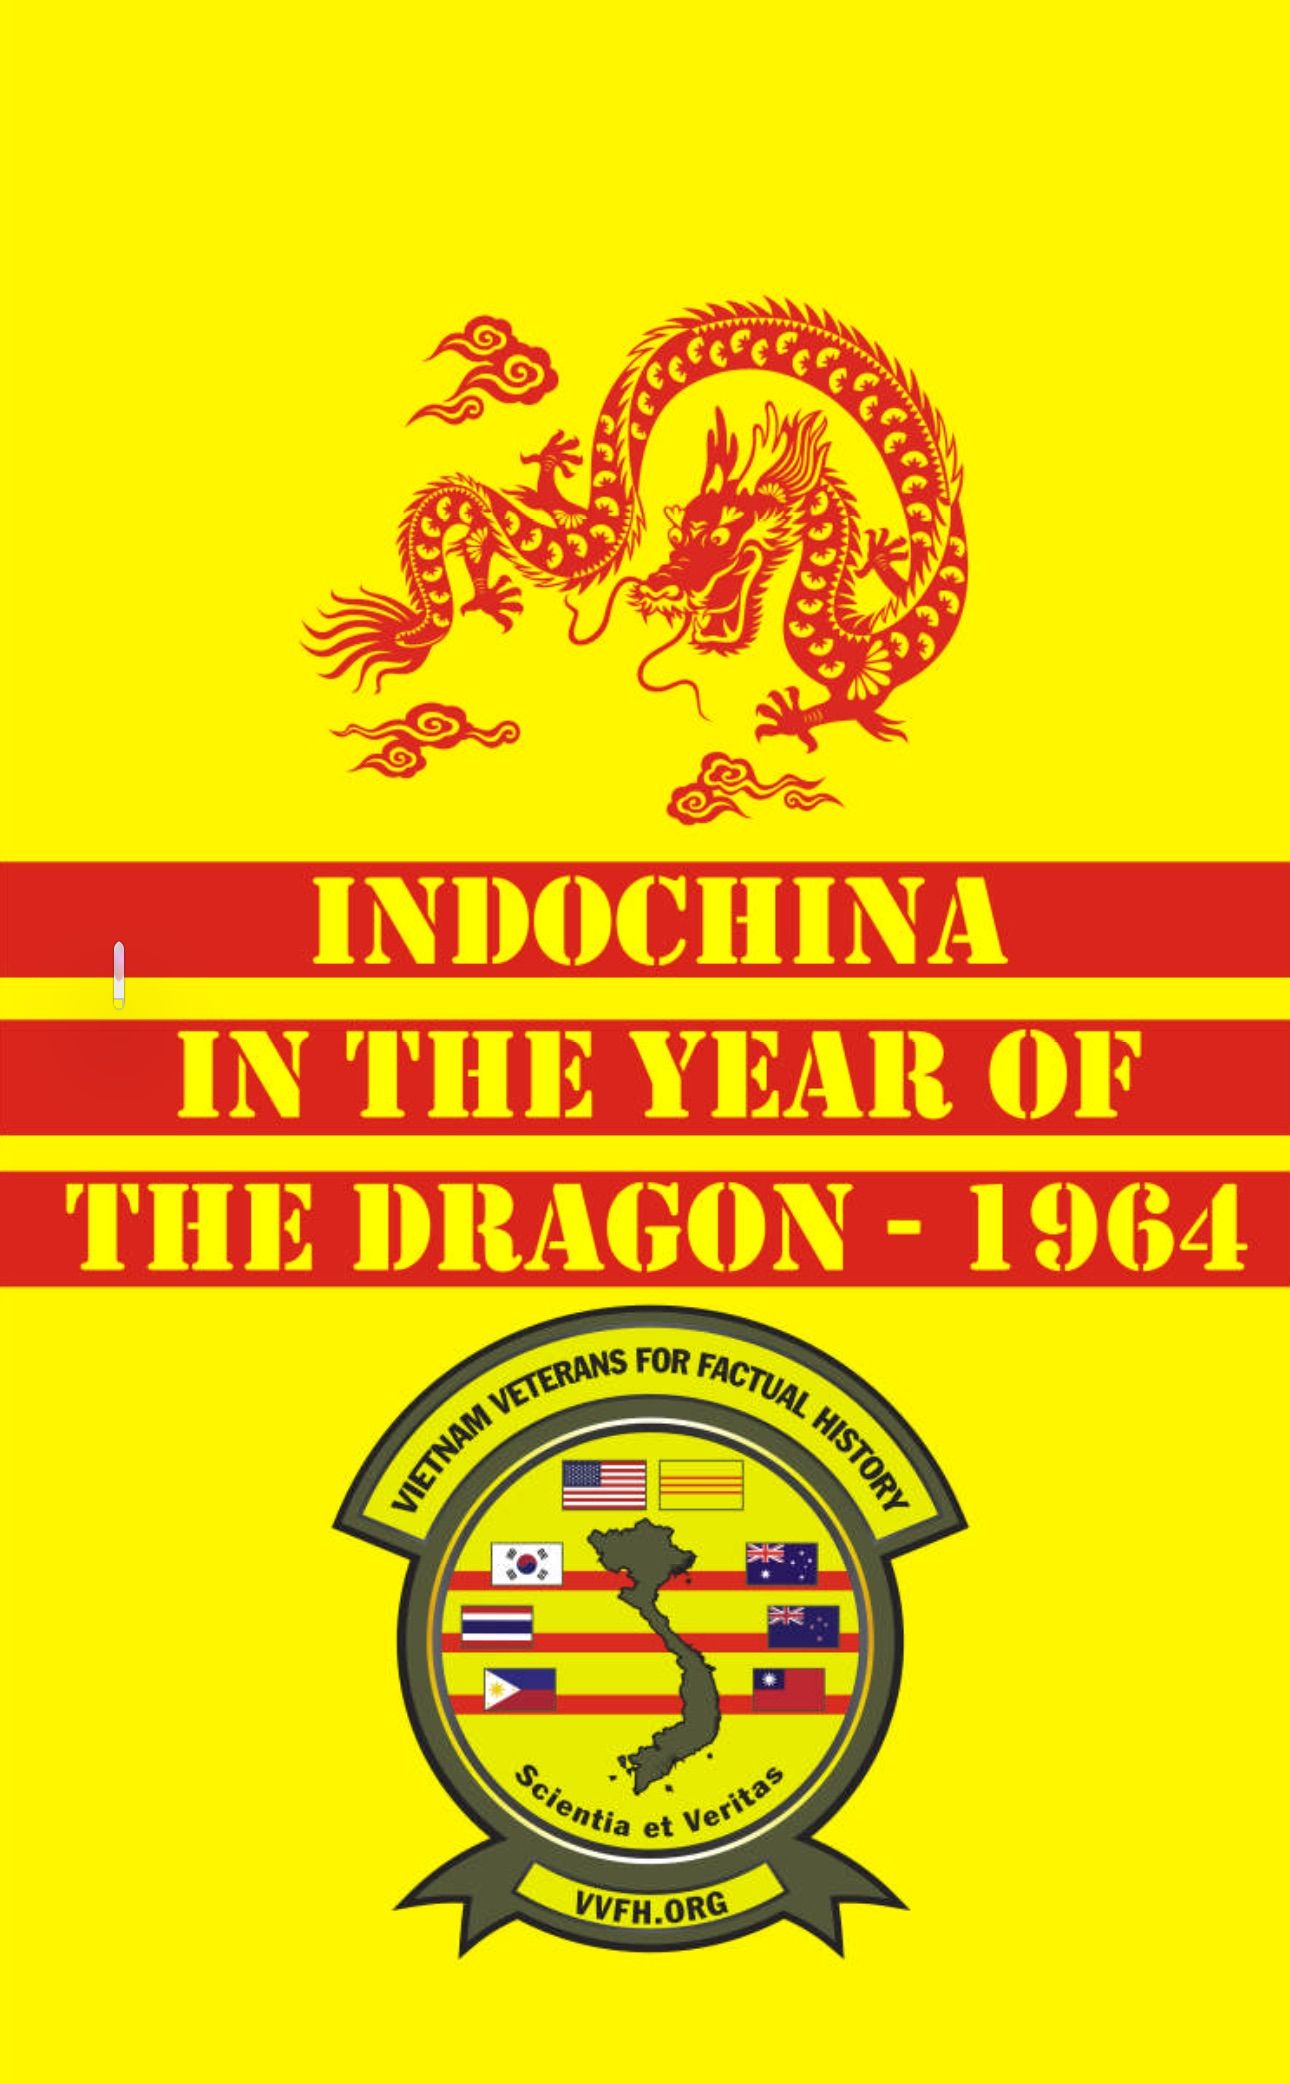 1964 Indochina in the Year of the Dragon